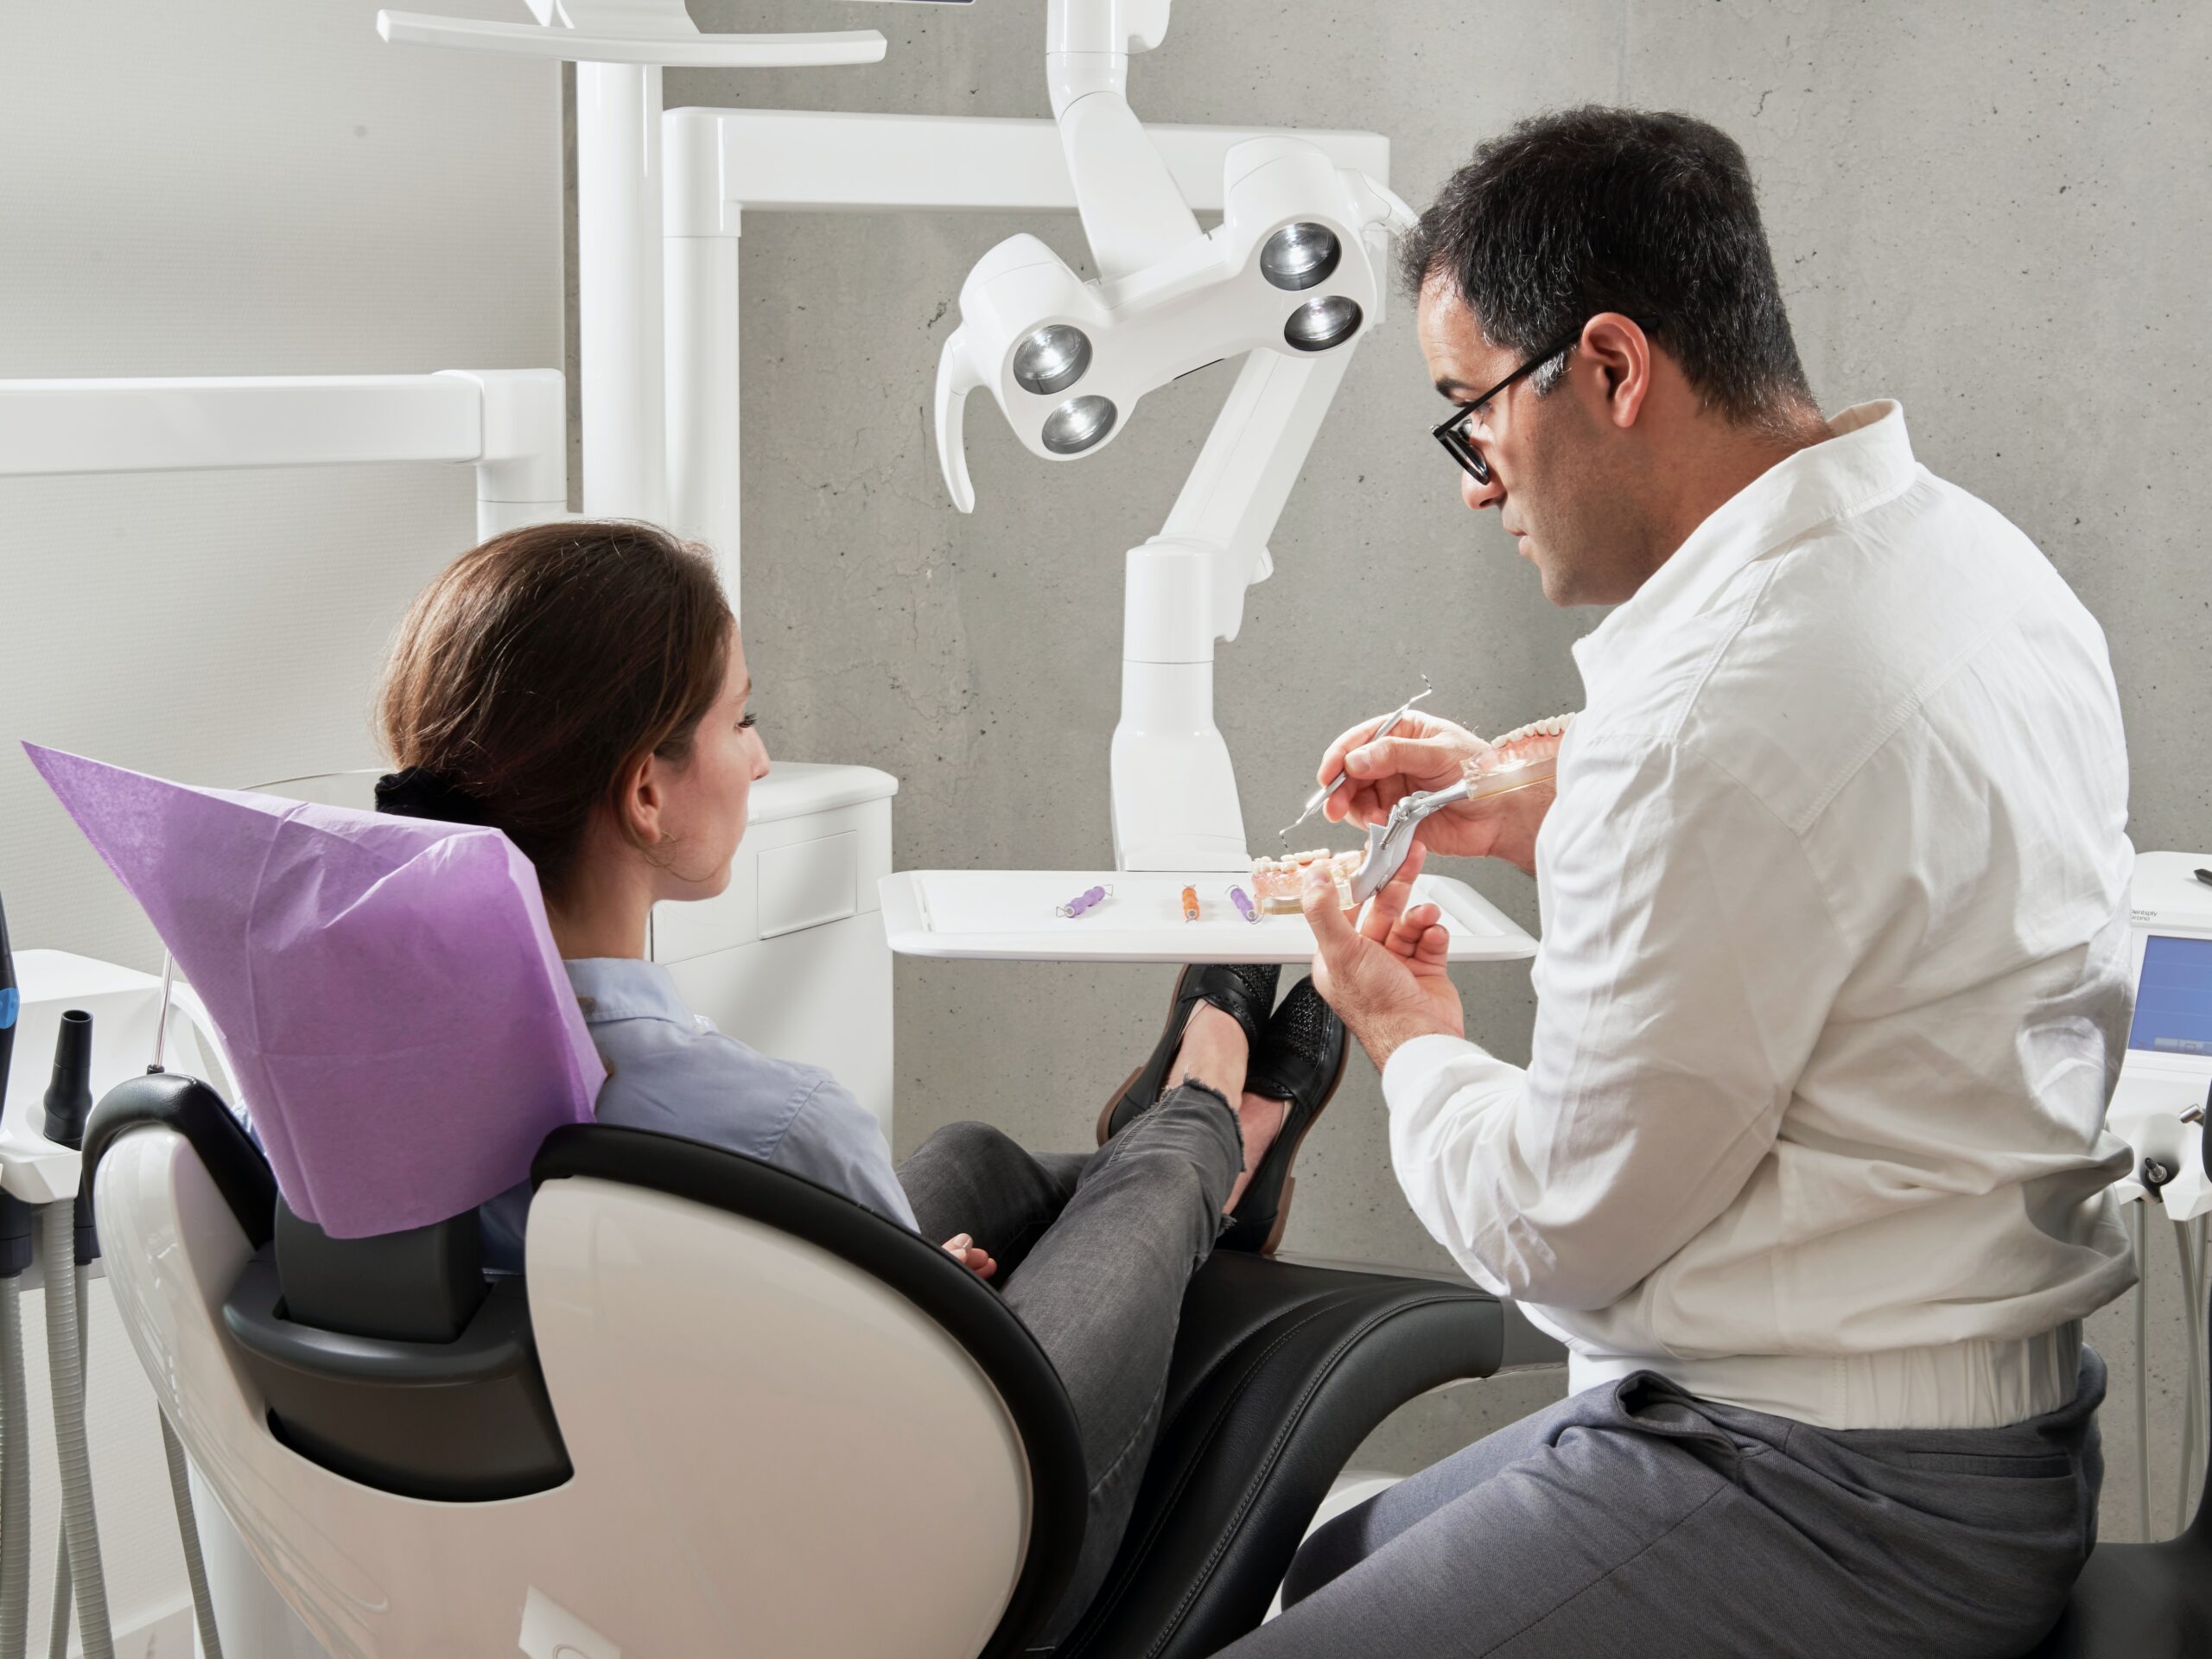 Professional dentist engaging in a consultation with a patient in a modern office setting, discussing oral health and treatment options.